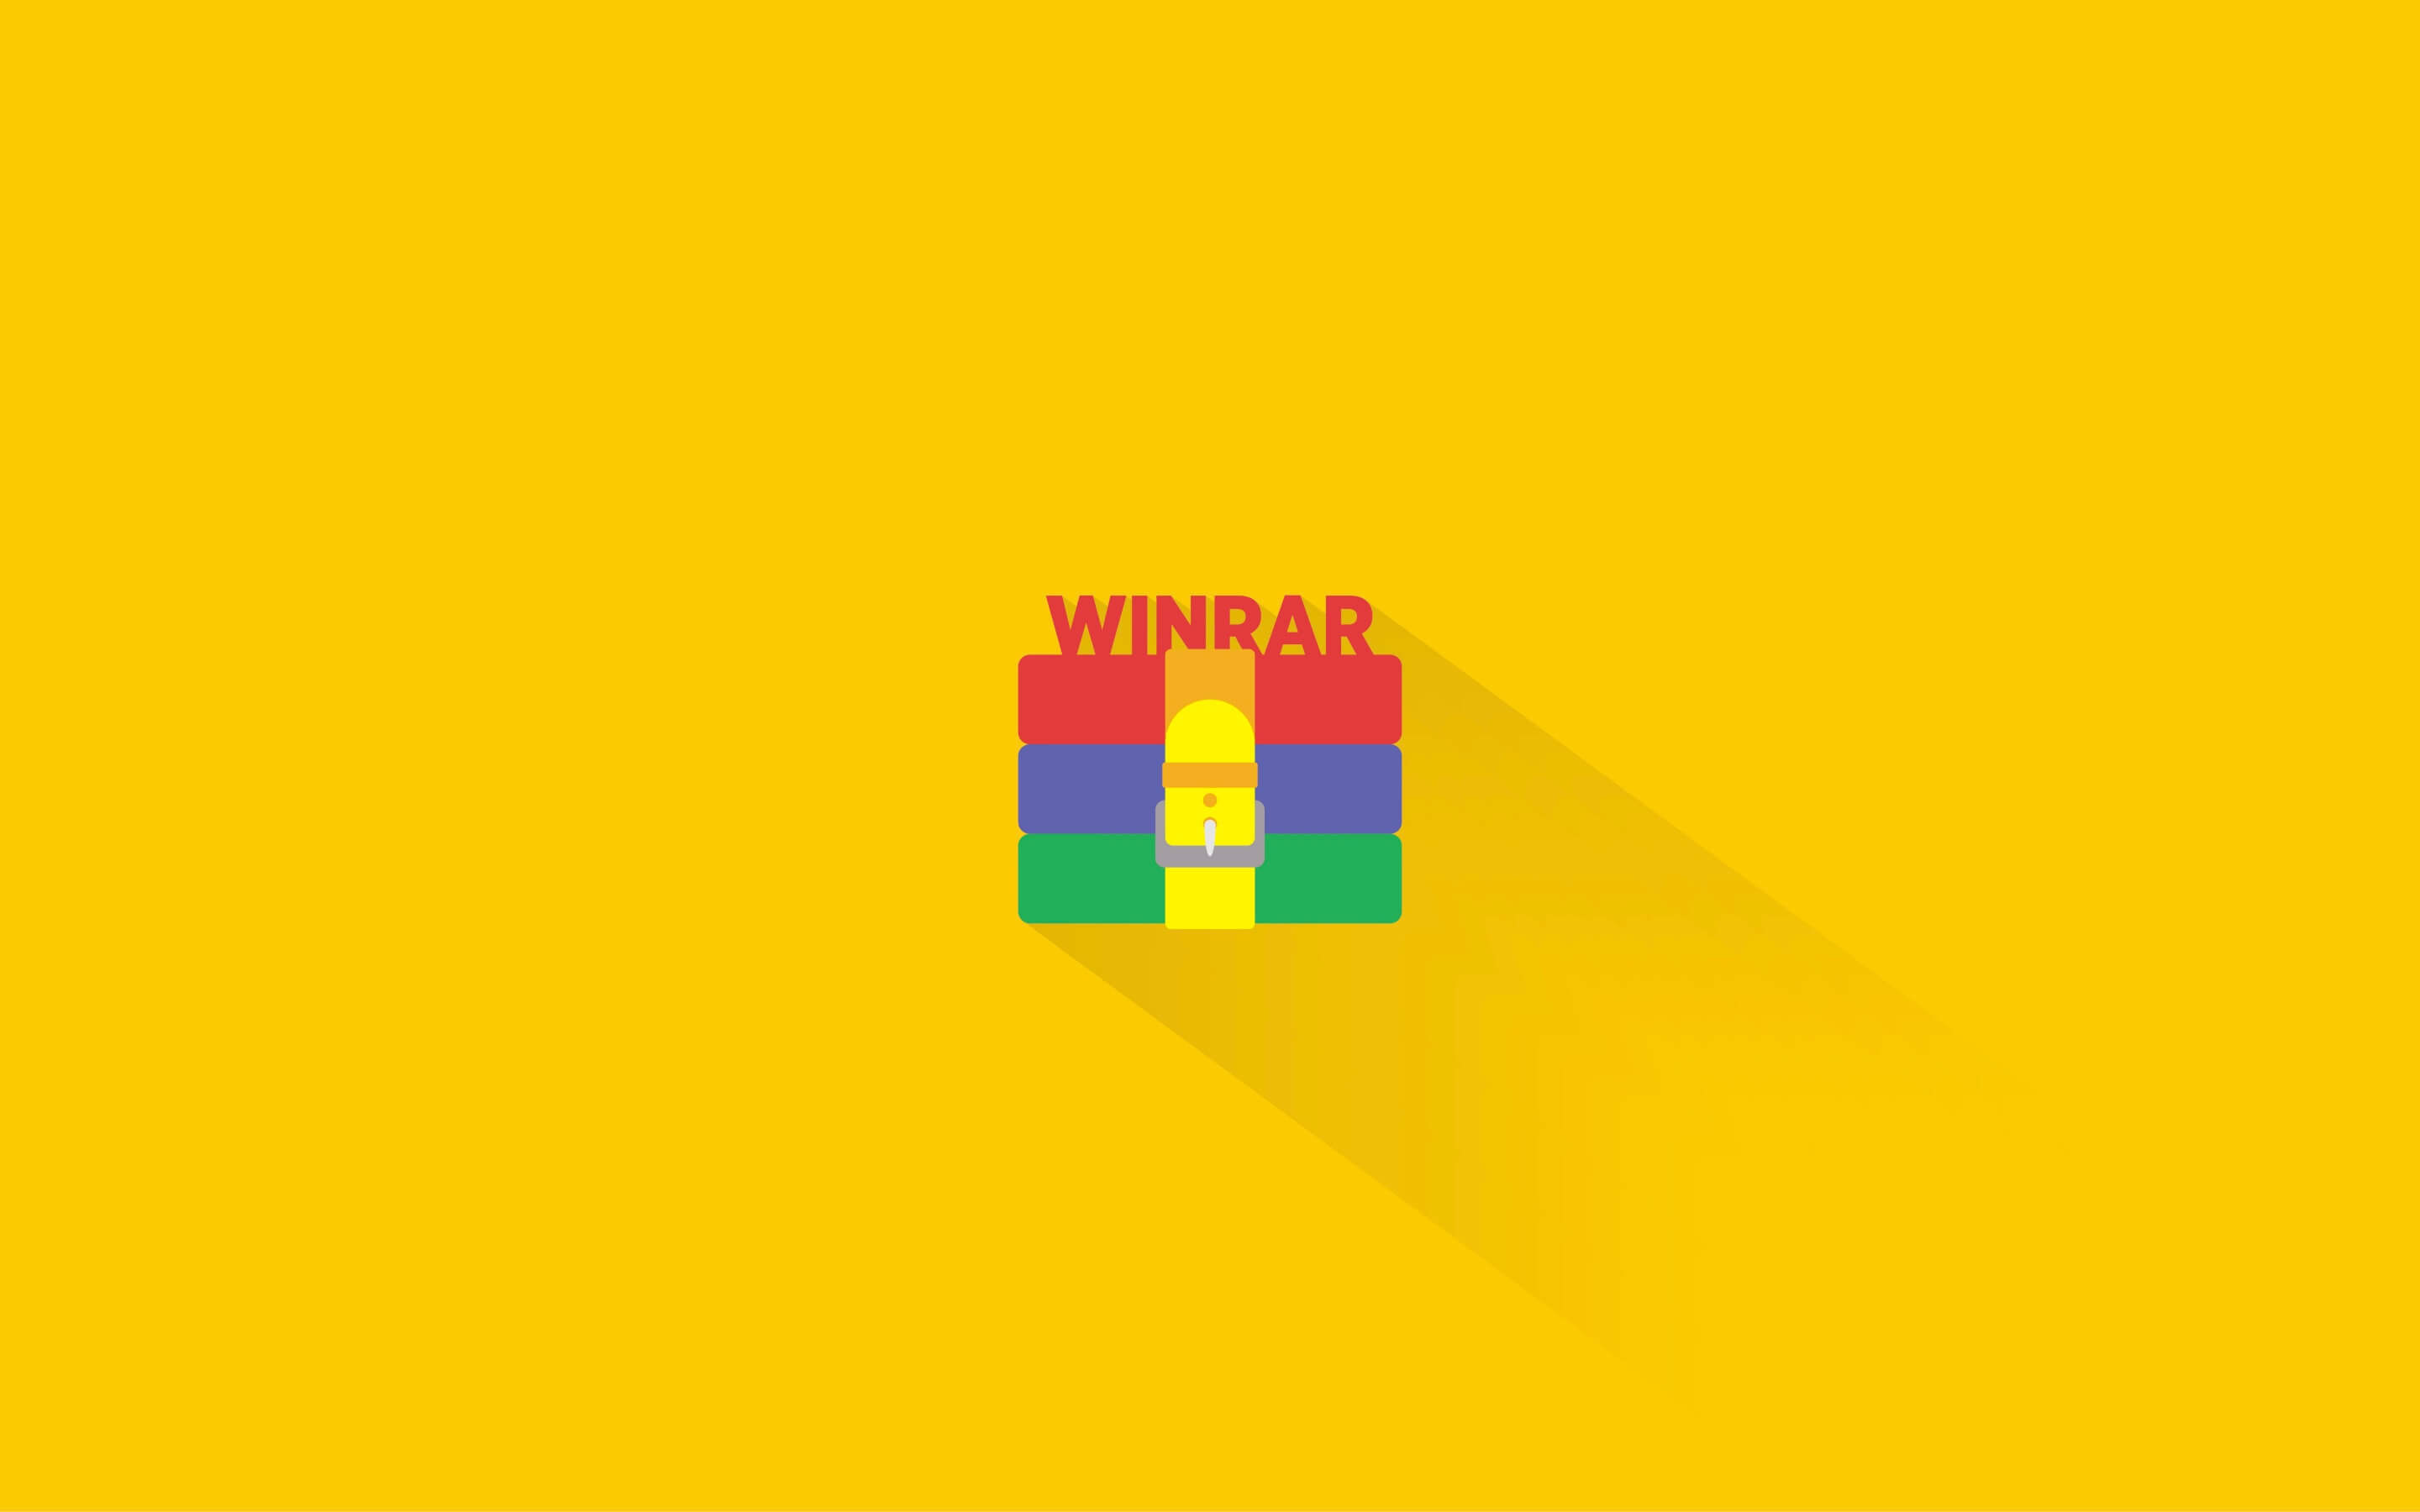 100 unique exploits and counting: Hackers begin exploiting WinRAR critical vulnerability